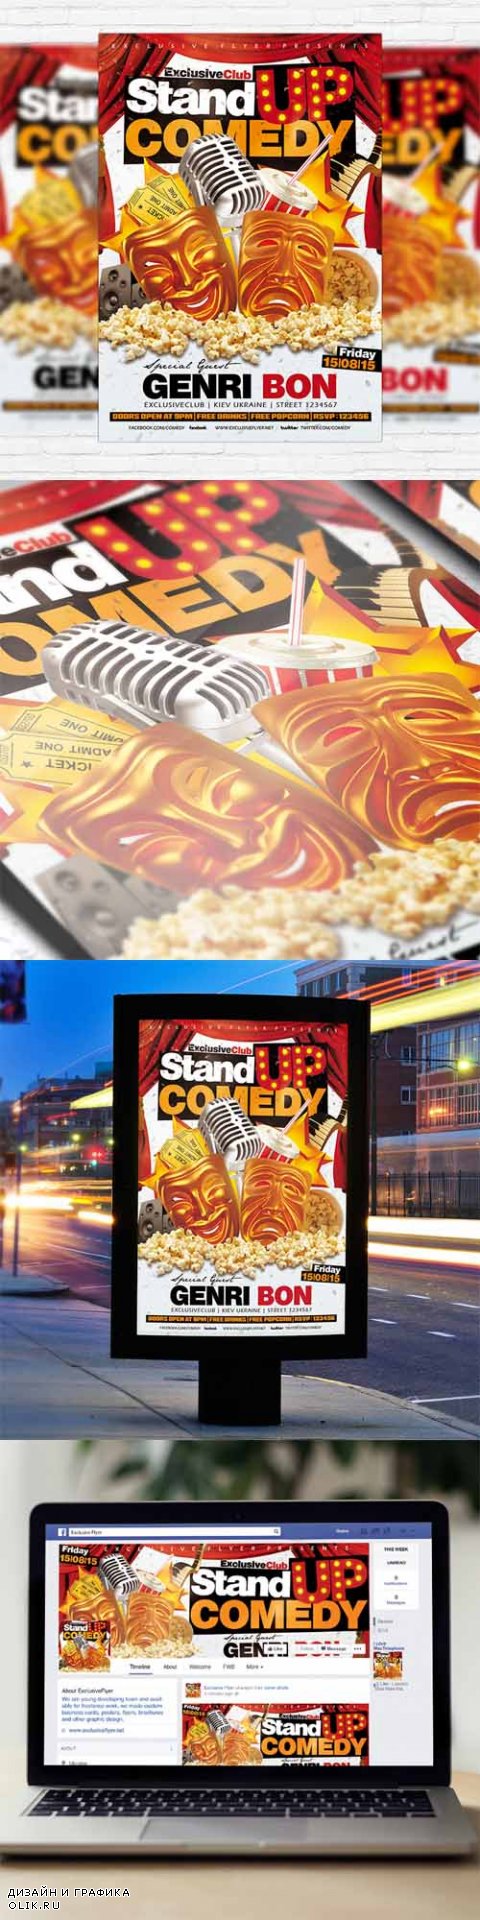 Flyer Template - Stand Up Comedy + Facebook Cover